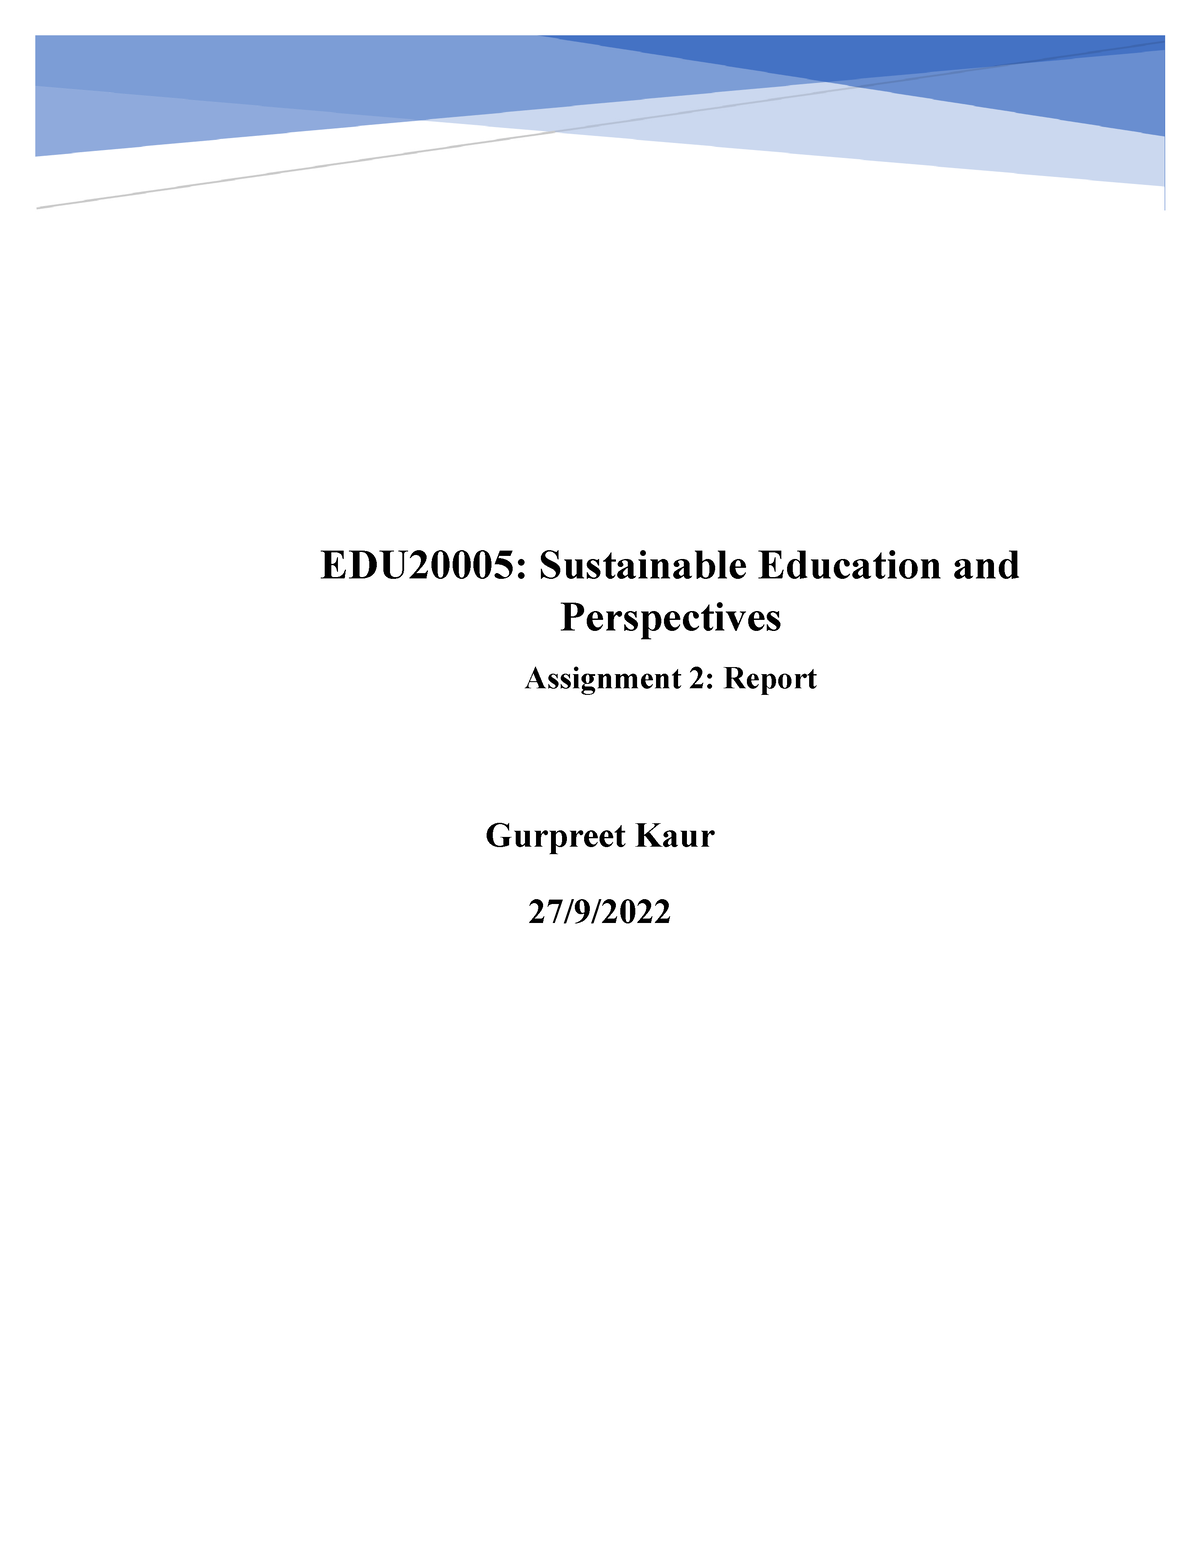 edu20005 sustainable education and perspectives assignment 2 report